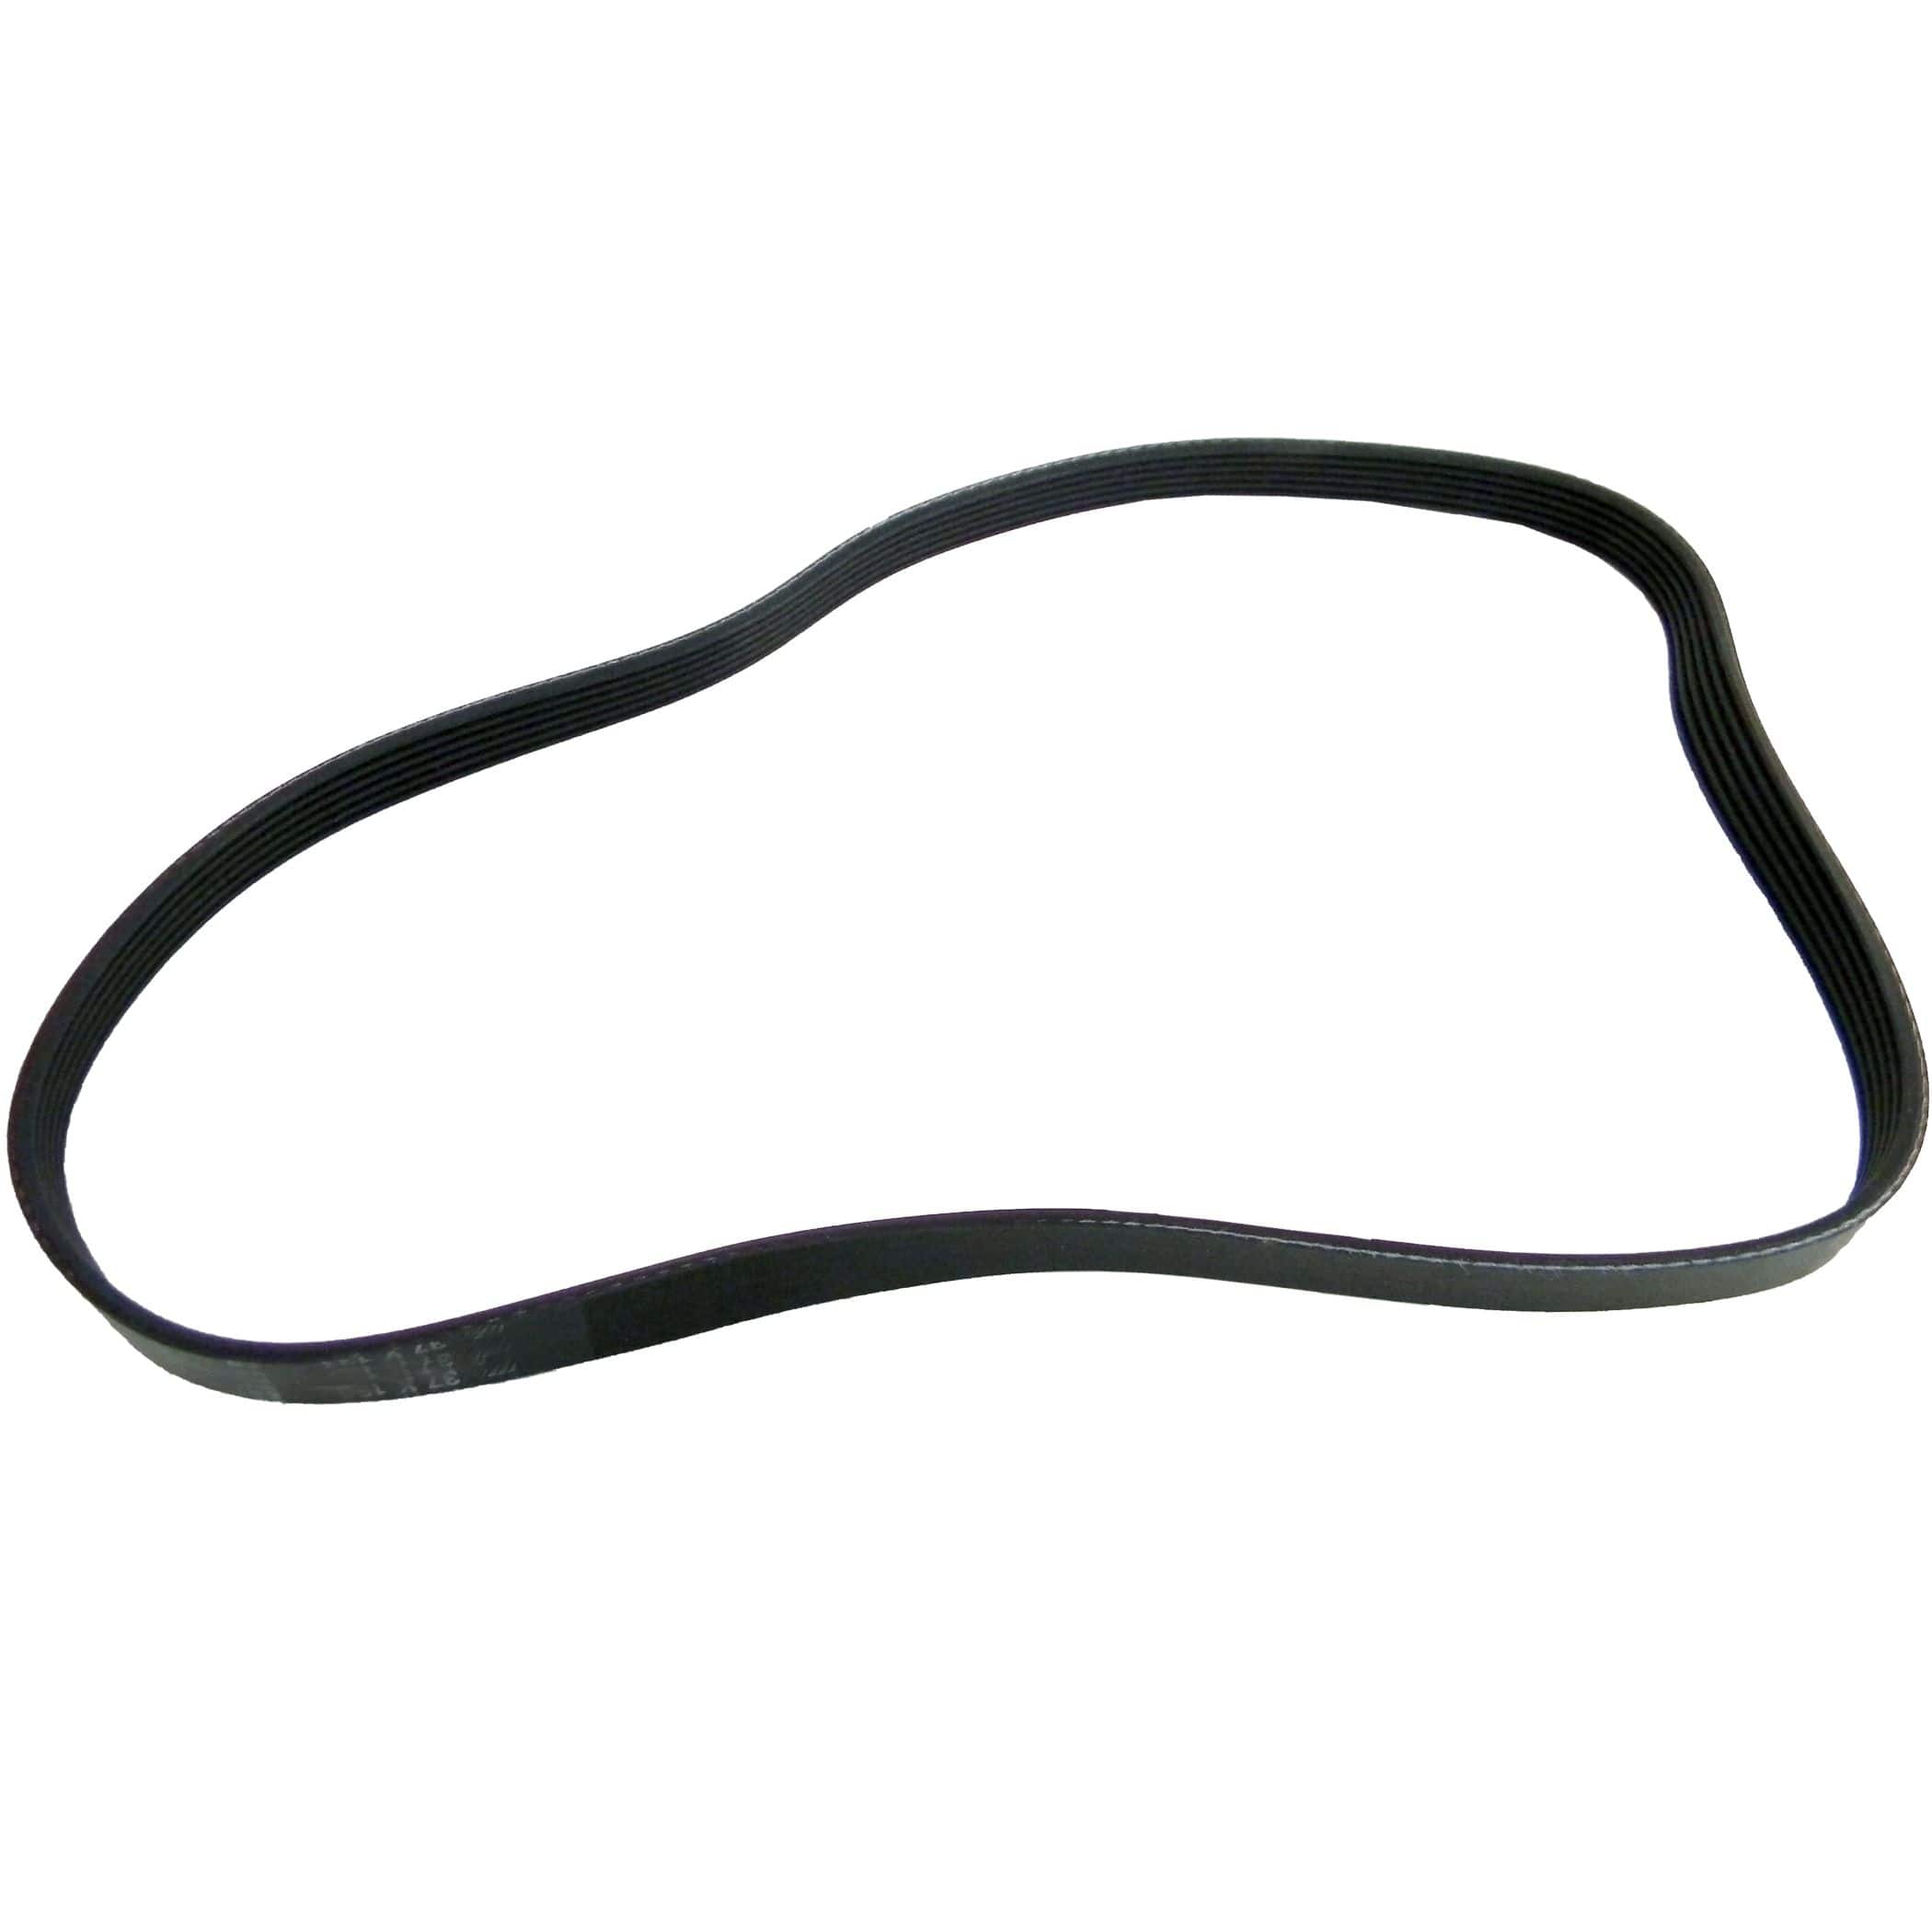 Certified Snowblower Replacement Drive Belt for CT#: 060-3732